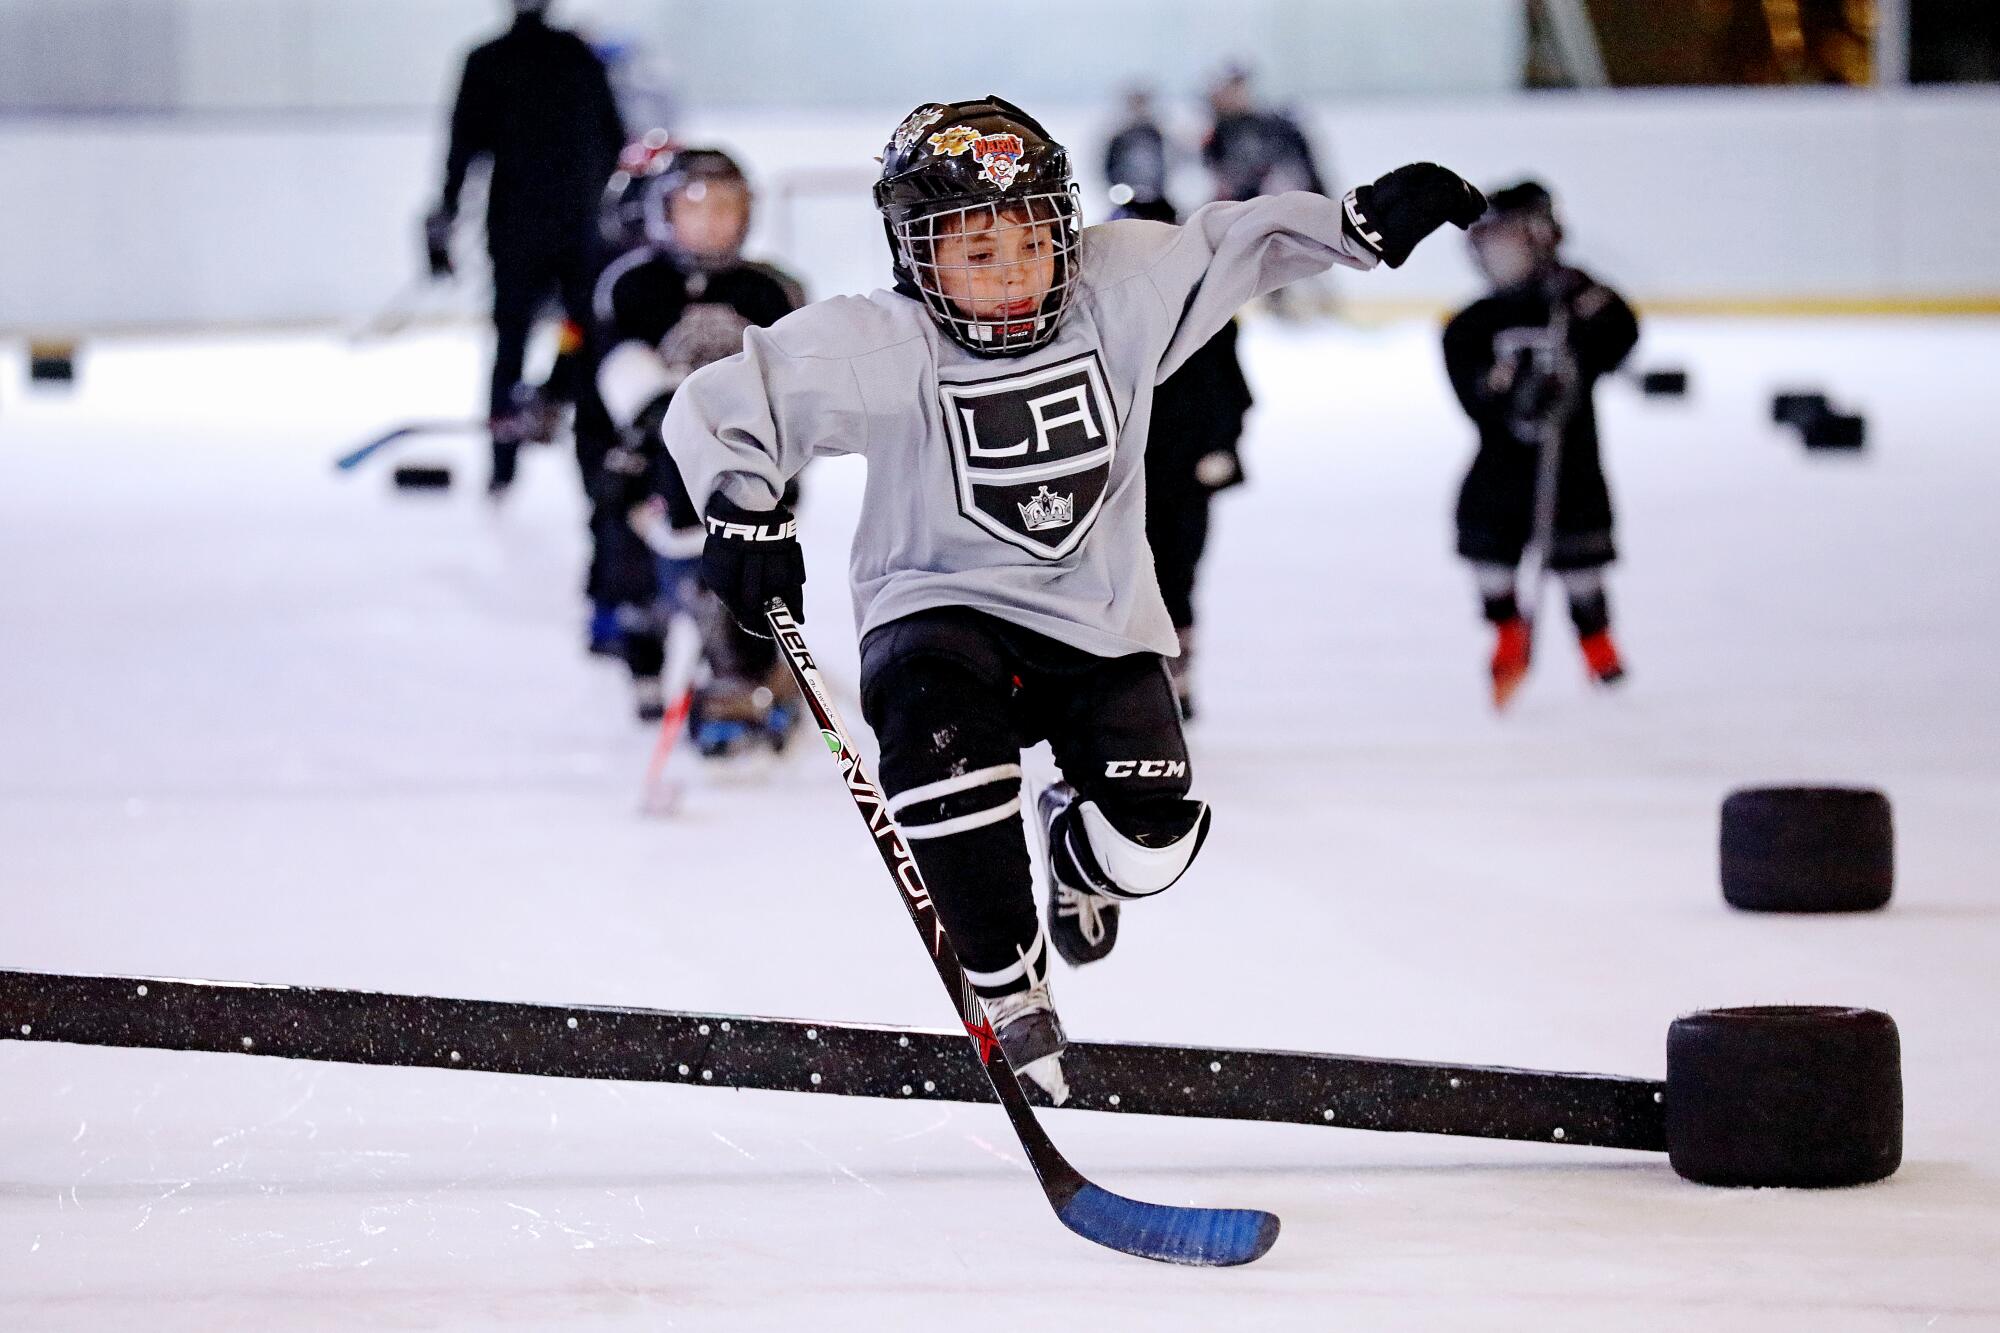 What's Next For The California Hockey Teams